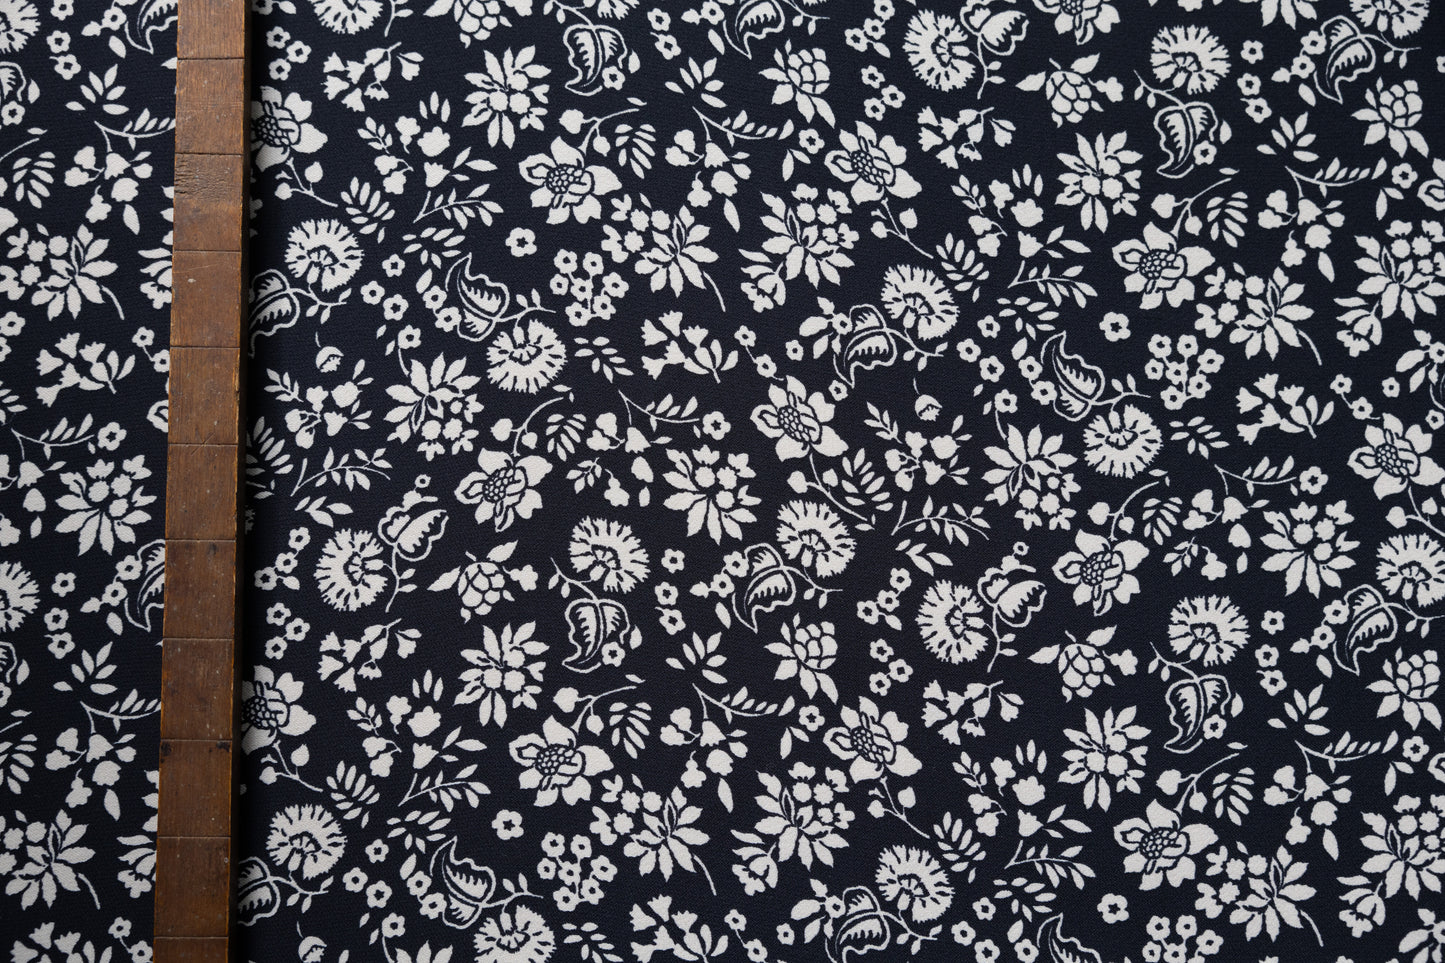 Black and ivory dead stock floral viscose, sold per meter